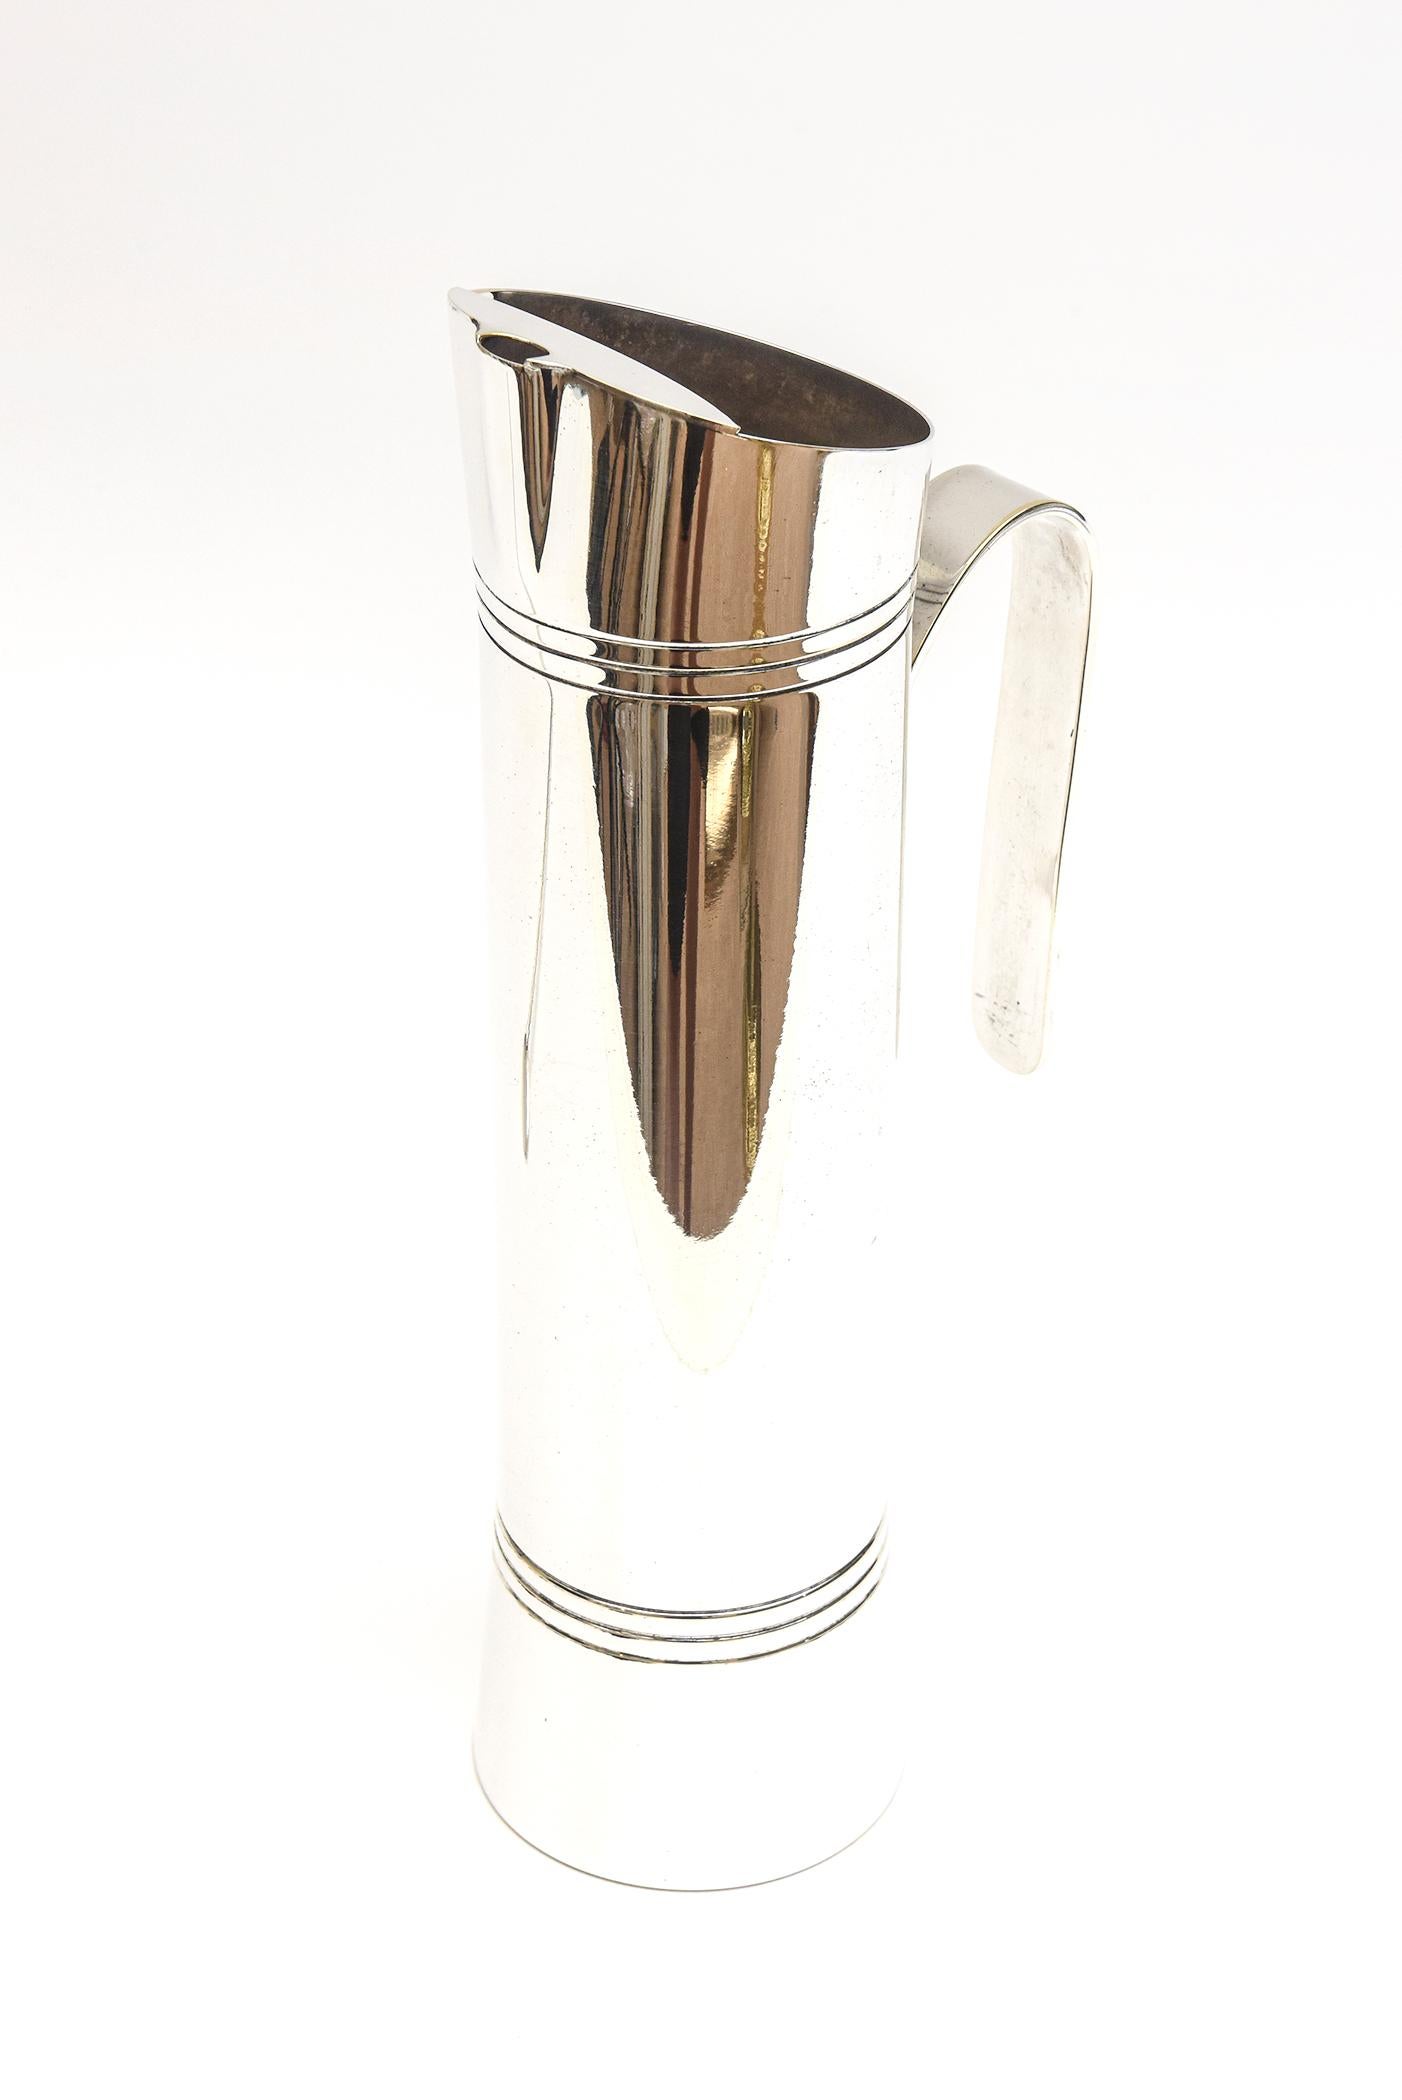 This tall elegant chic ribbed silver-plate signed Italian vintage cocktail mixer or pitcher has a curved handle. There are 2 areas of ribbed lines that make it very modernist looking with an art deco nod. The long spoon is a great addition for this